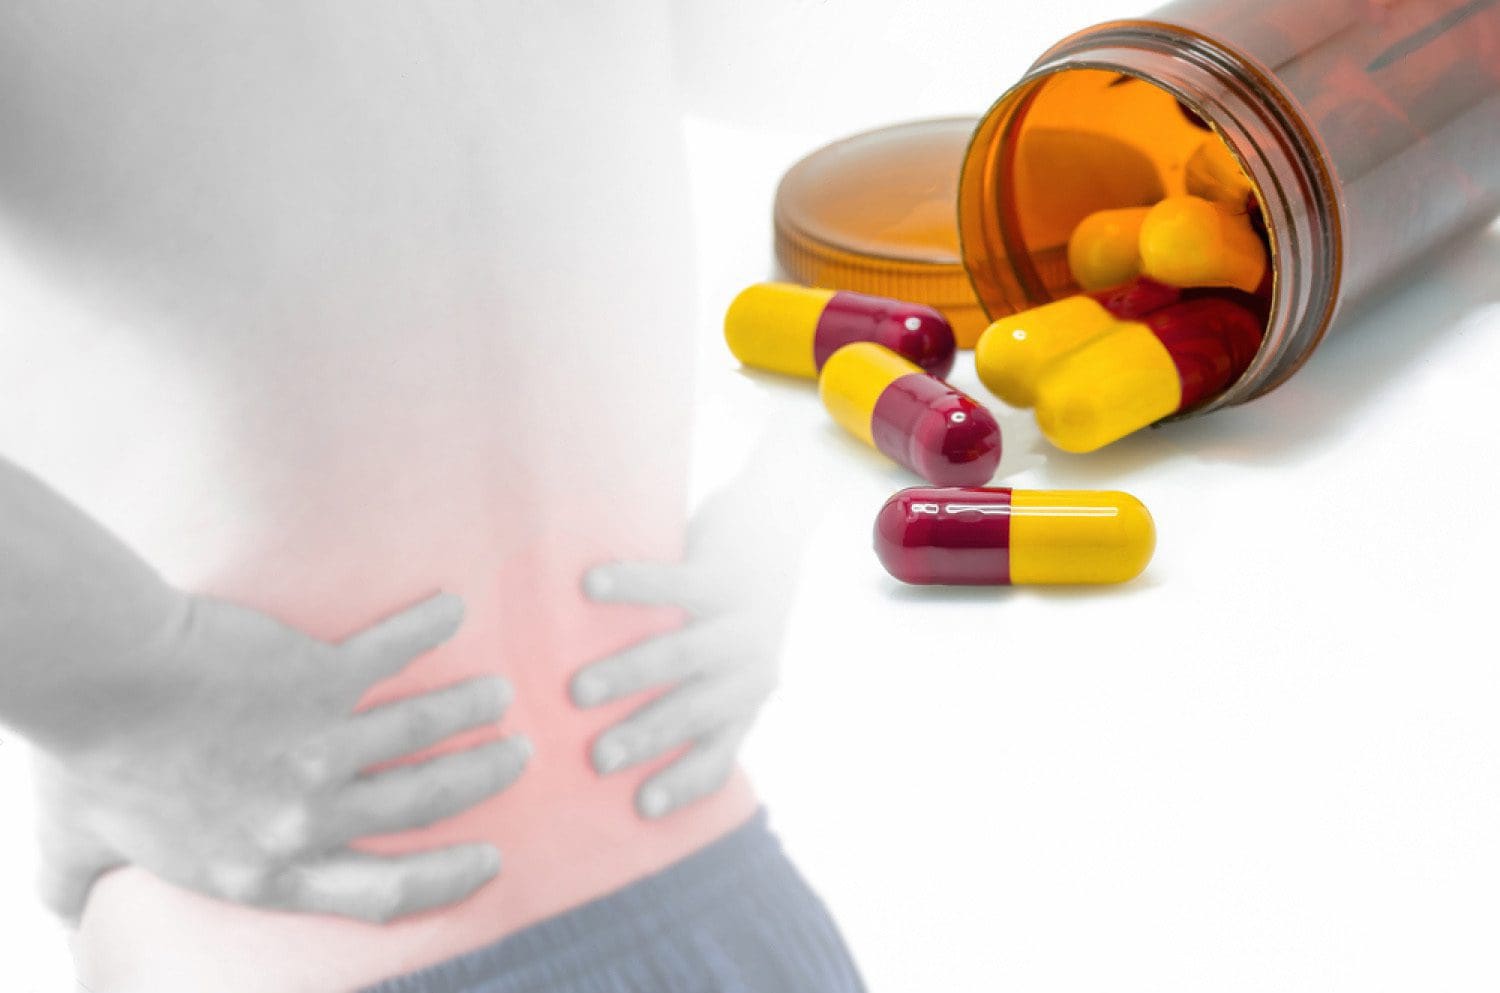 man grabbing lower back in pain and a bottle of pain medication open with capsules out of bottle